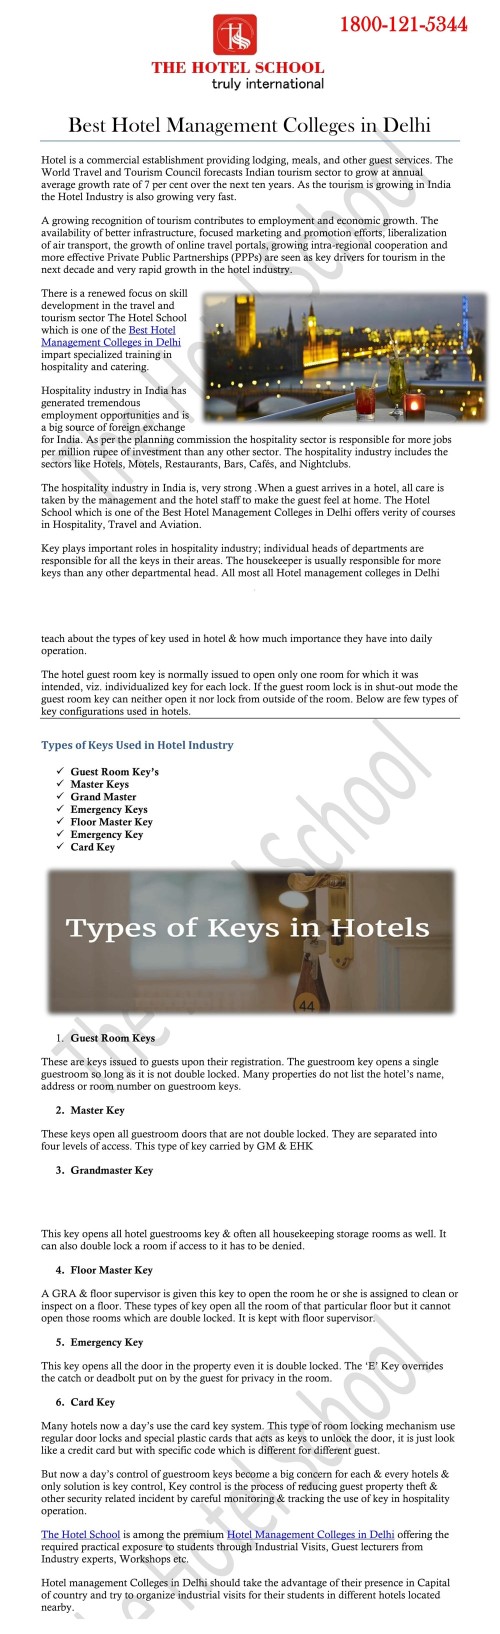 http://thehotelschool.com/best-hotel-management-institutes-in-delhi.html | The Hotel School, New Delhi is among the best Hotel Management Institutes in Delhi have a motive of providing students quality education, grooming them for future and enhancing the techniques and skills required to become best hospitality professionals. The Hotel School is the most sought after Hotel Management Institute in Delhi located at Kapashera in close Proximity to Indira Gandhi International Airport, New Delhi. With globalization and liberalization being the hallmark of the present world, the tourism sector has been expanding like never before.